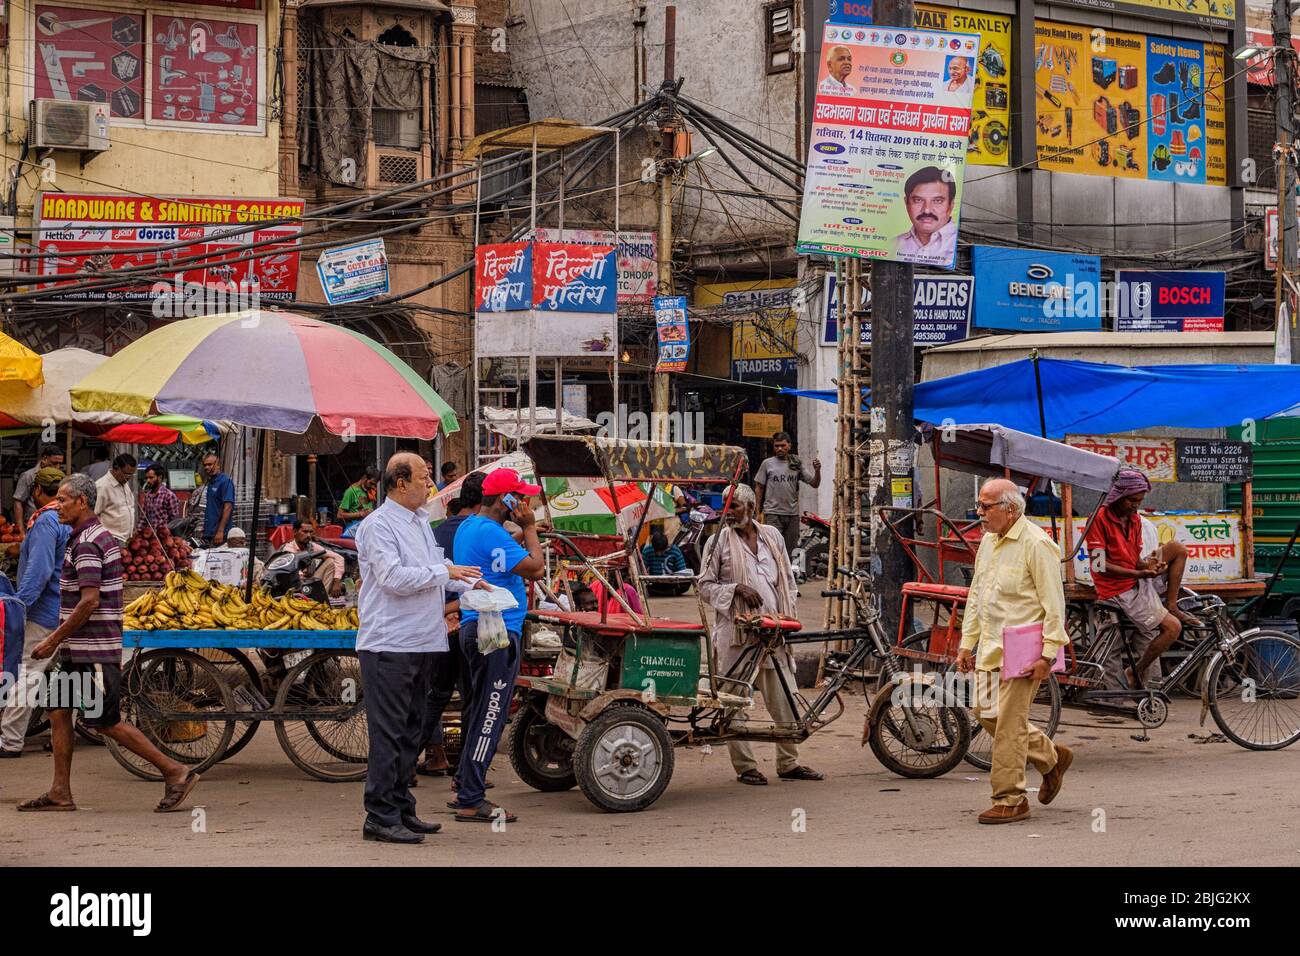 New Delhi / India - September 19, 2019: Chandni Chowk, busy shopping area in Old Delhi with bazaars and colorful narrow streets Stock Photo